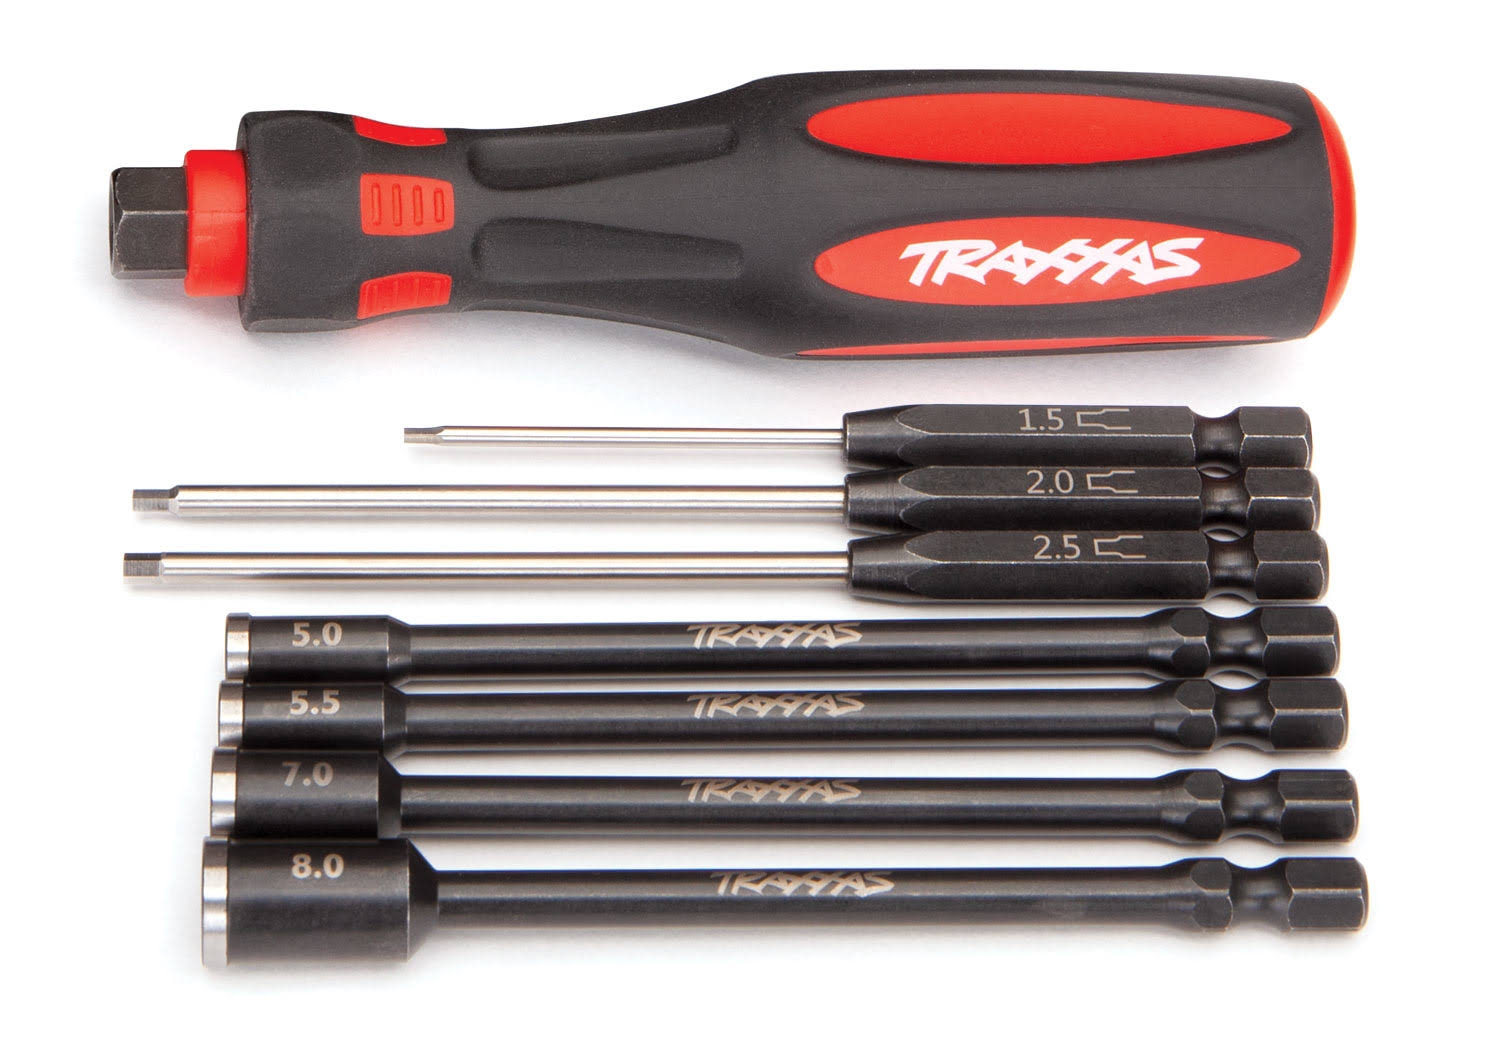 Traxxas 8712: 7-Piece Metric Hex and Nut Driver Essentials Tool Set